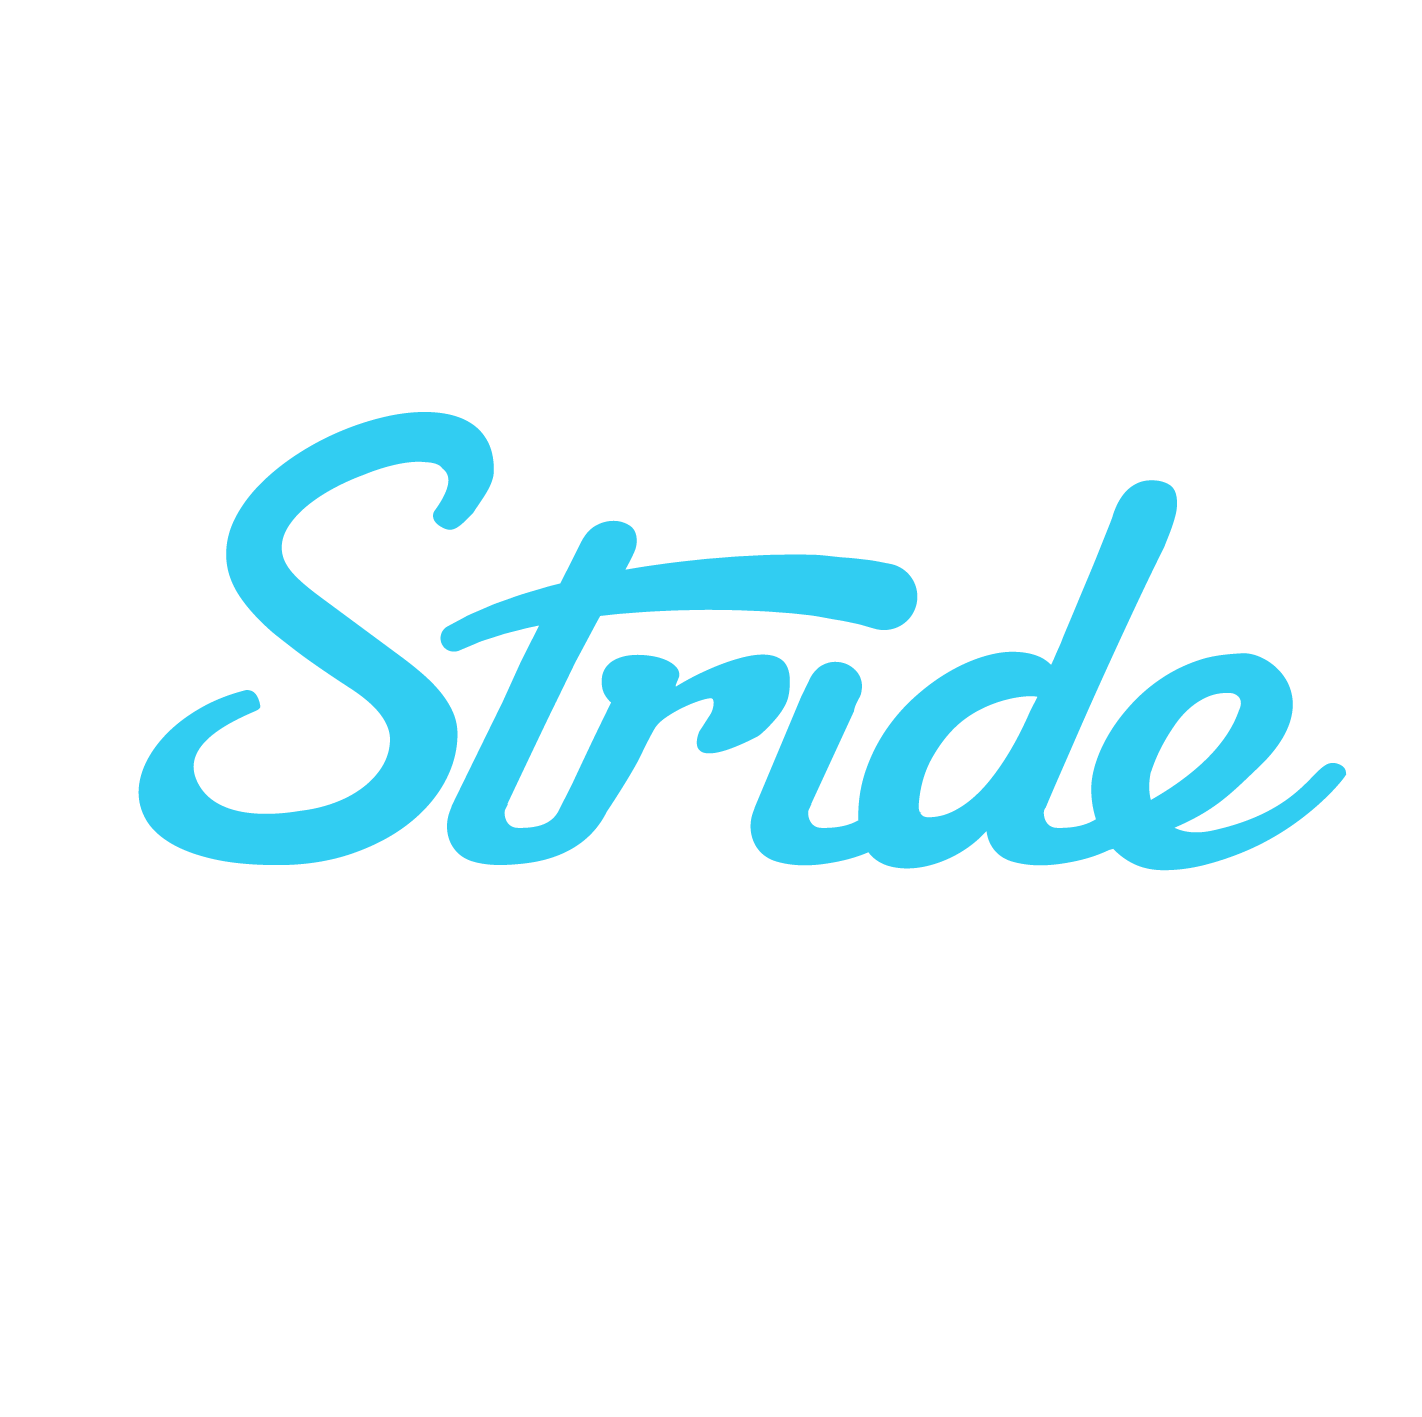 Stride helps real estate agents save time and money on health insurance, taxes, and more. Get a personalized plan recommendation and enroll in 10 minutes or less on Stride!